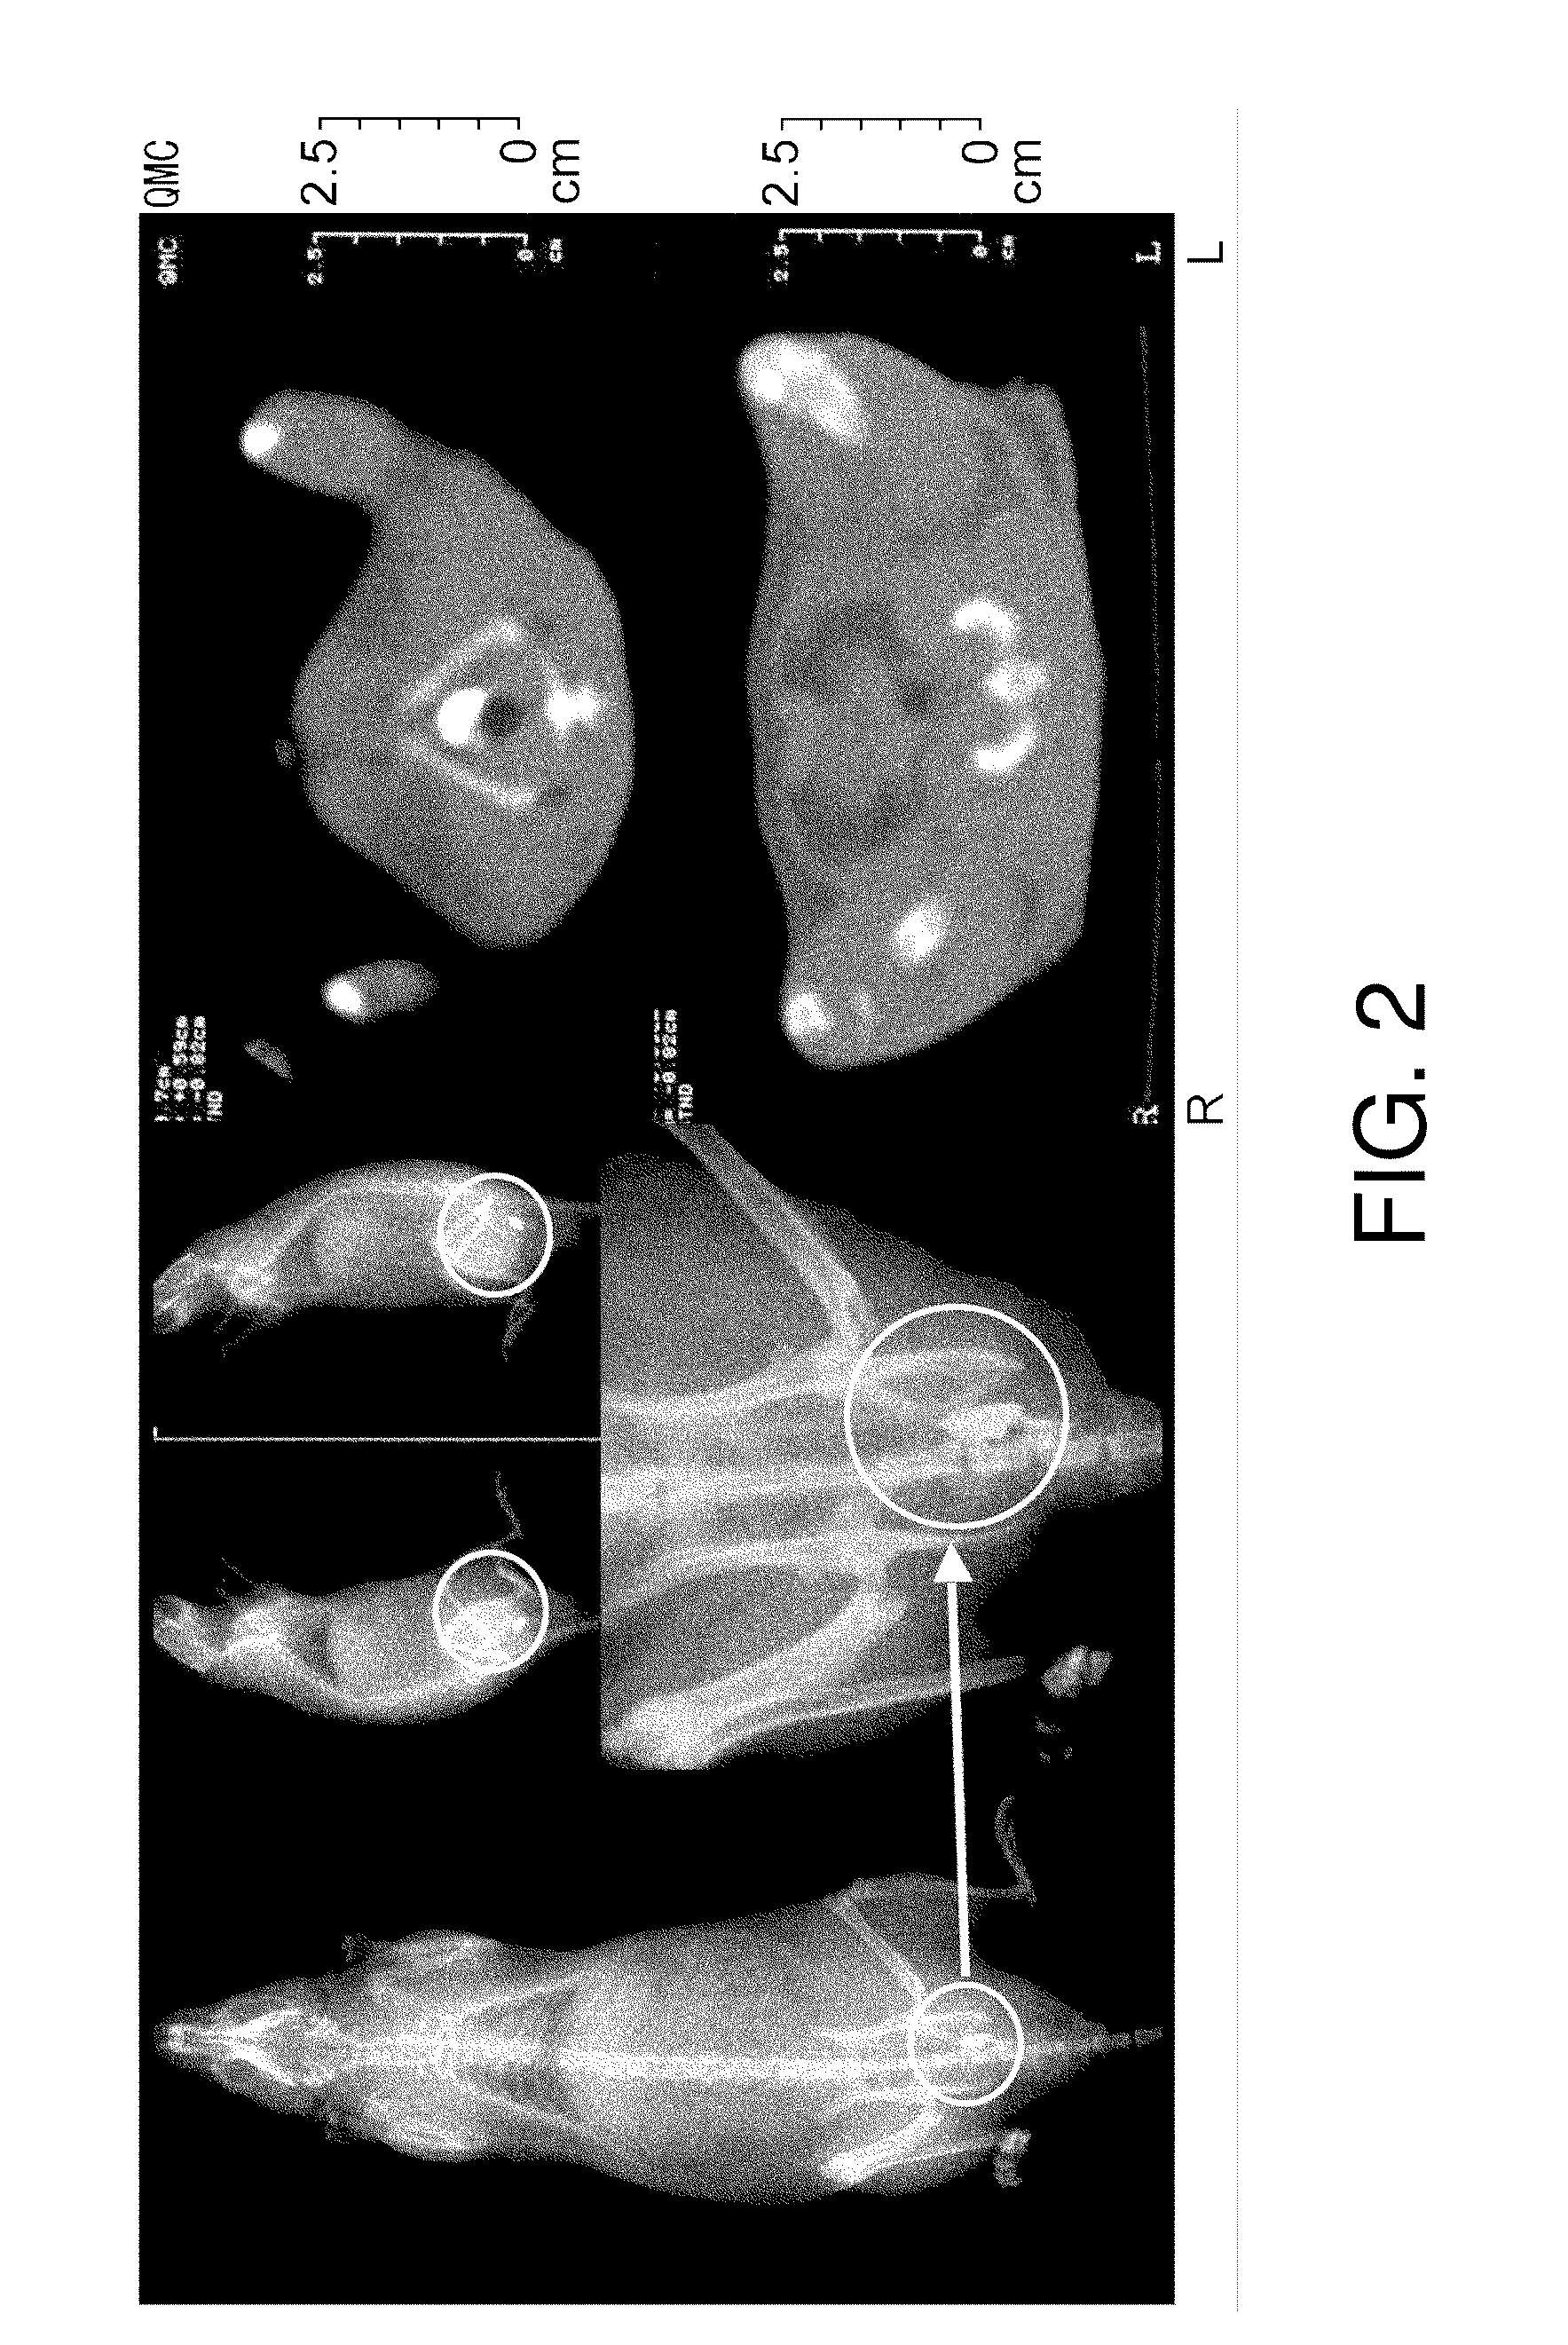 Method of fixing and expressing physiologically active substance